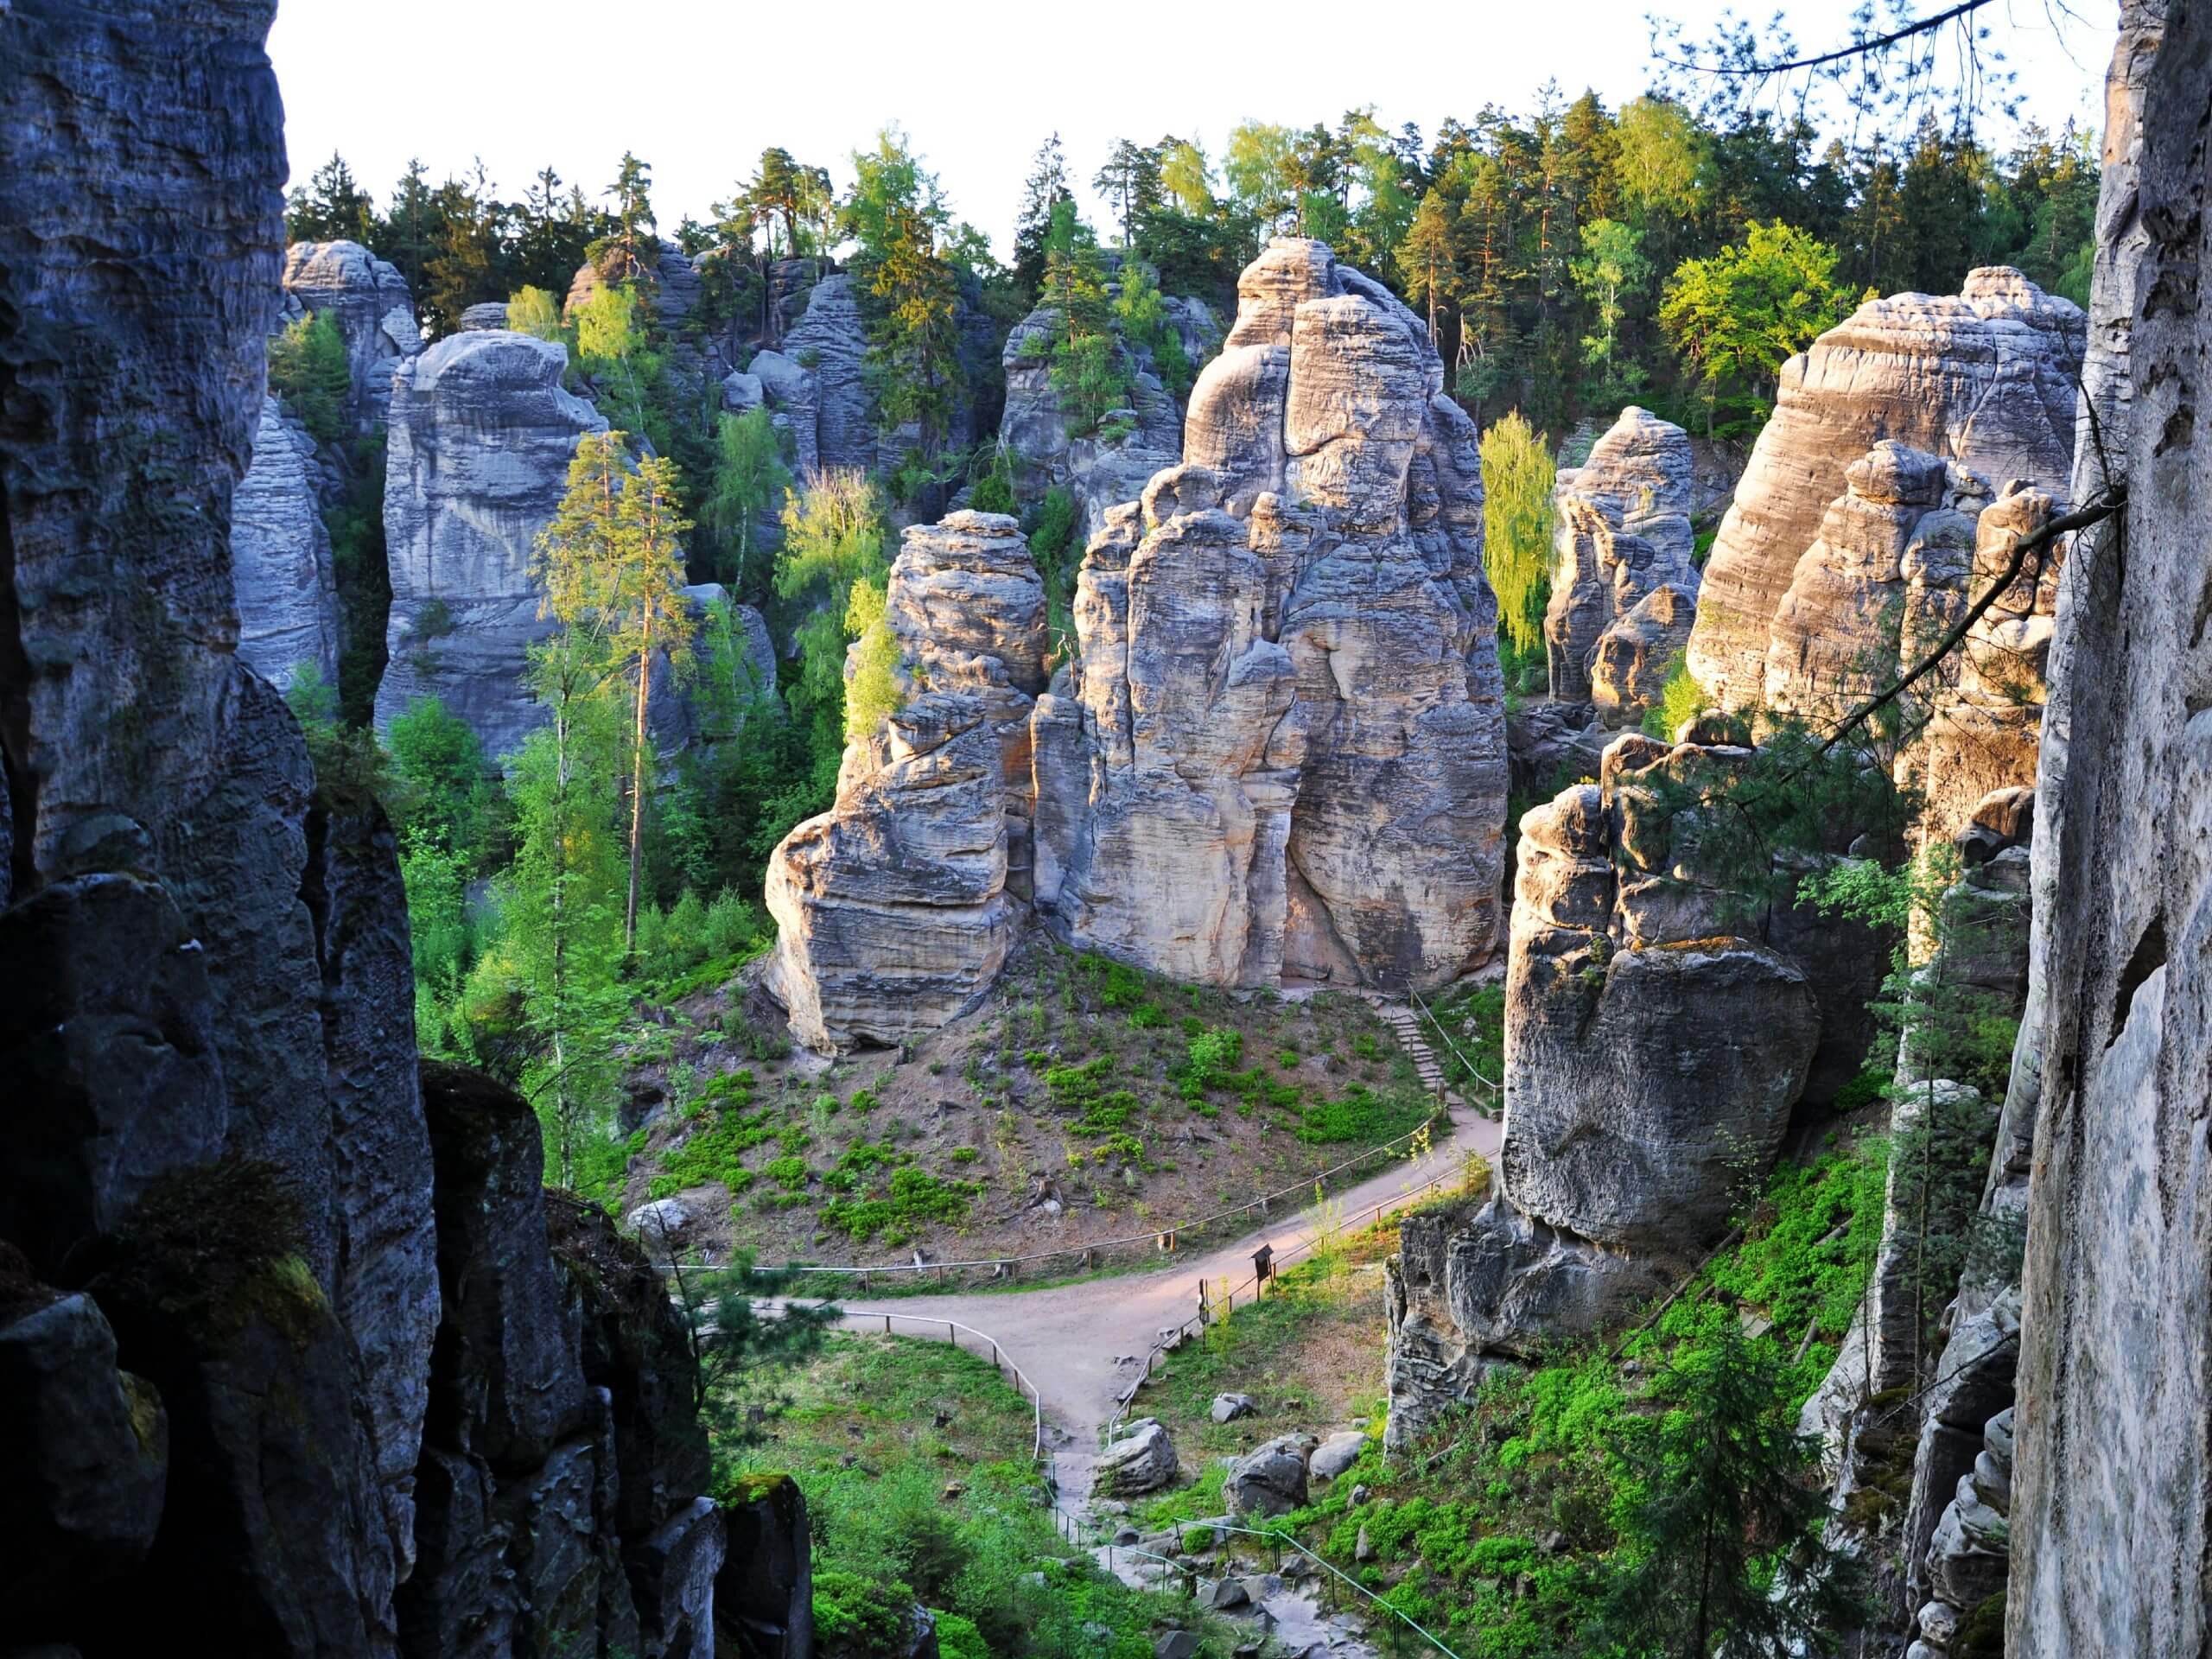 Walking among the rock formations in Bohemian Paradise